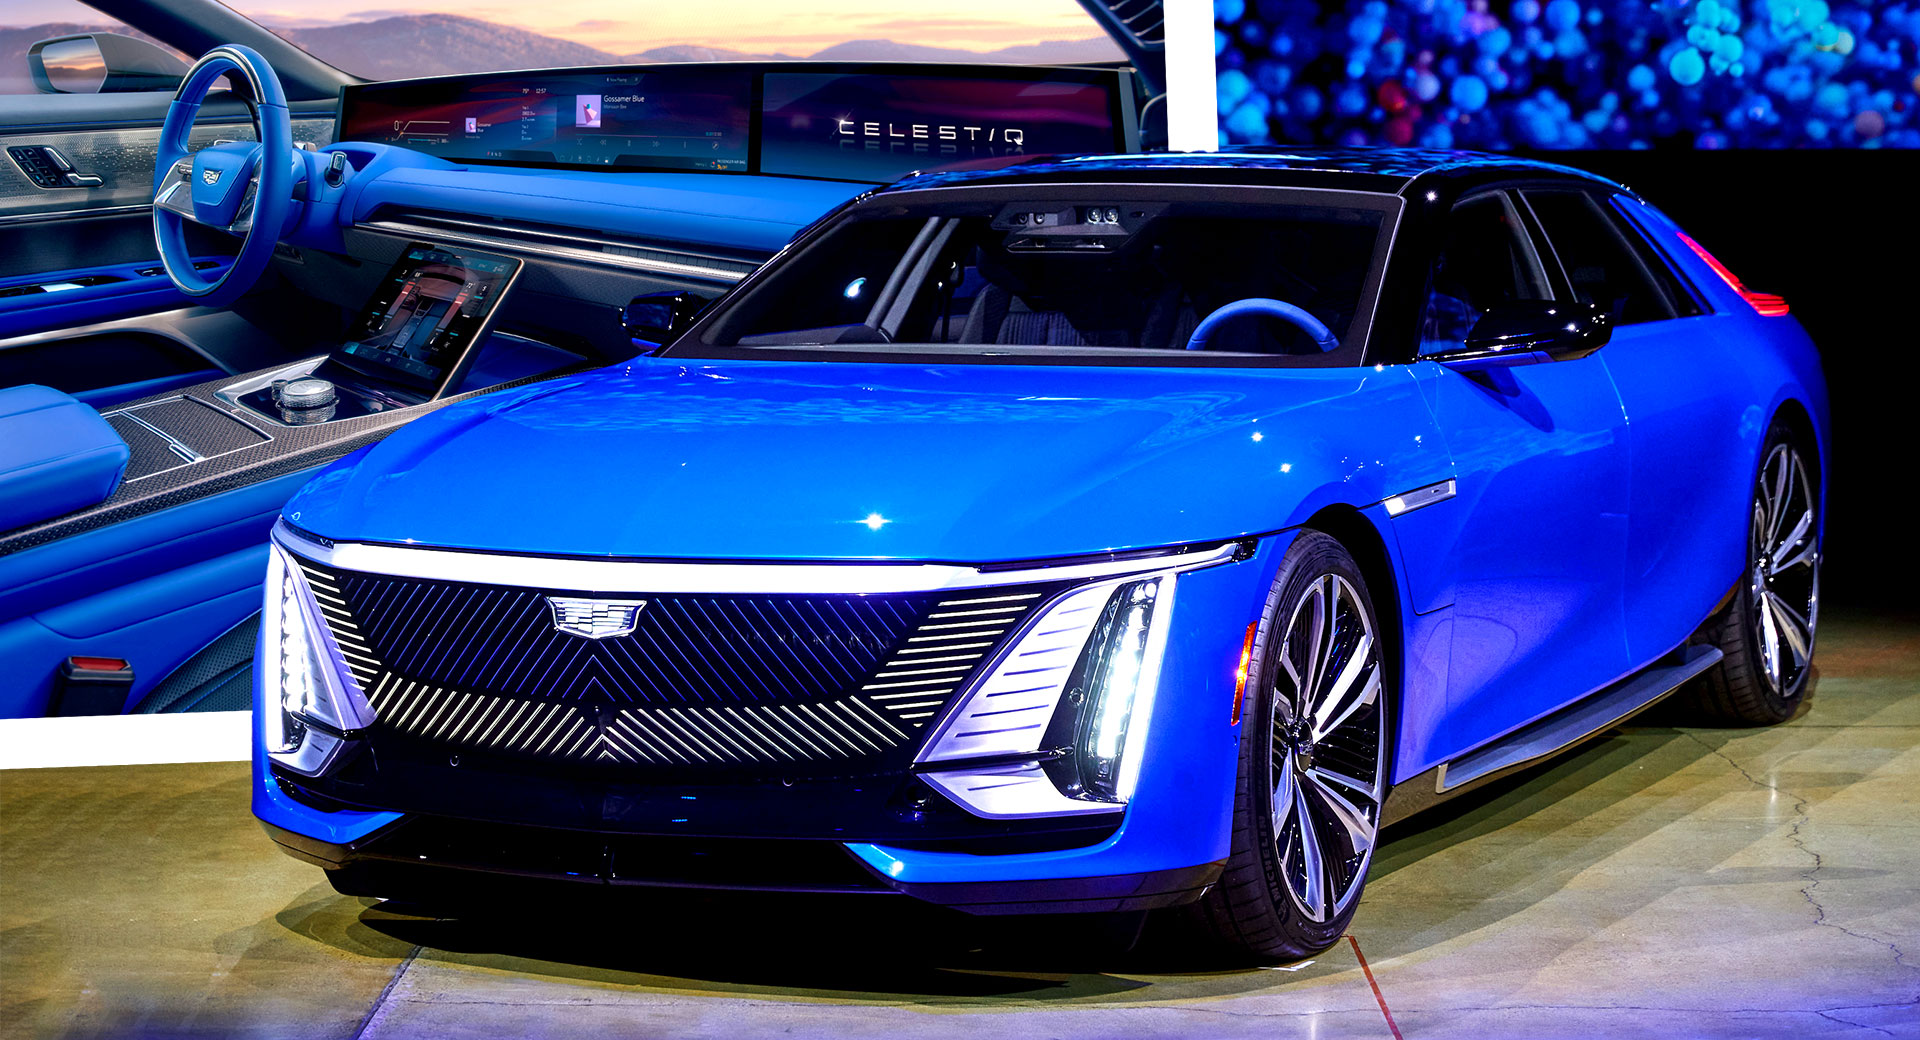 2024 Cadillac Celestiq Flagship EV Debuts With 600 HP, 300 Miles Of Range  And $300,000+ Price Tag | Carscoops